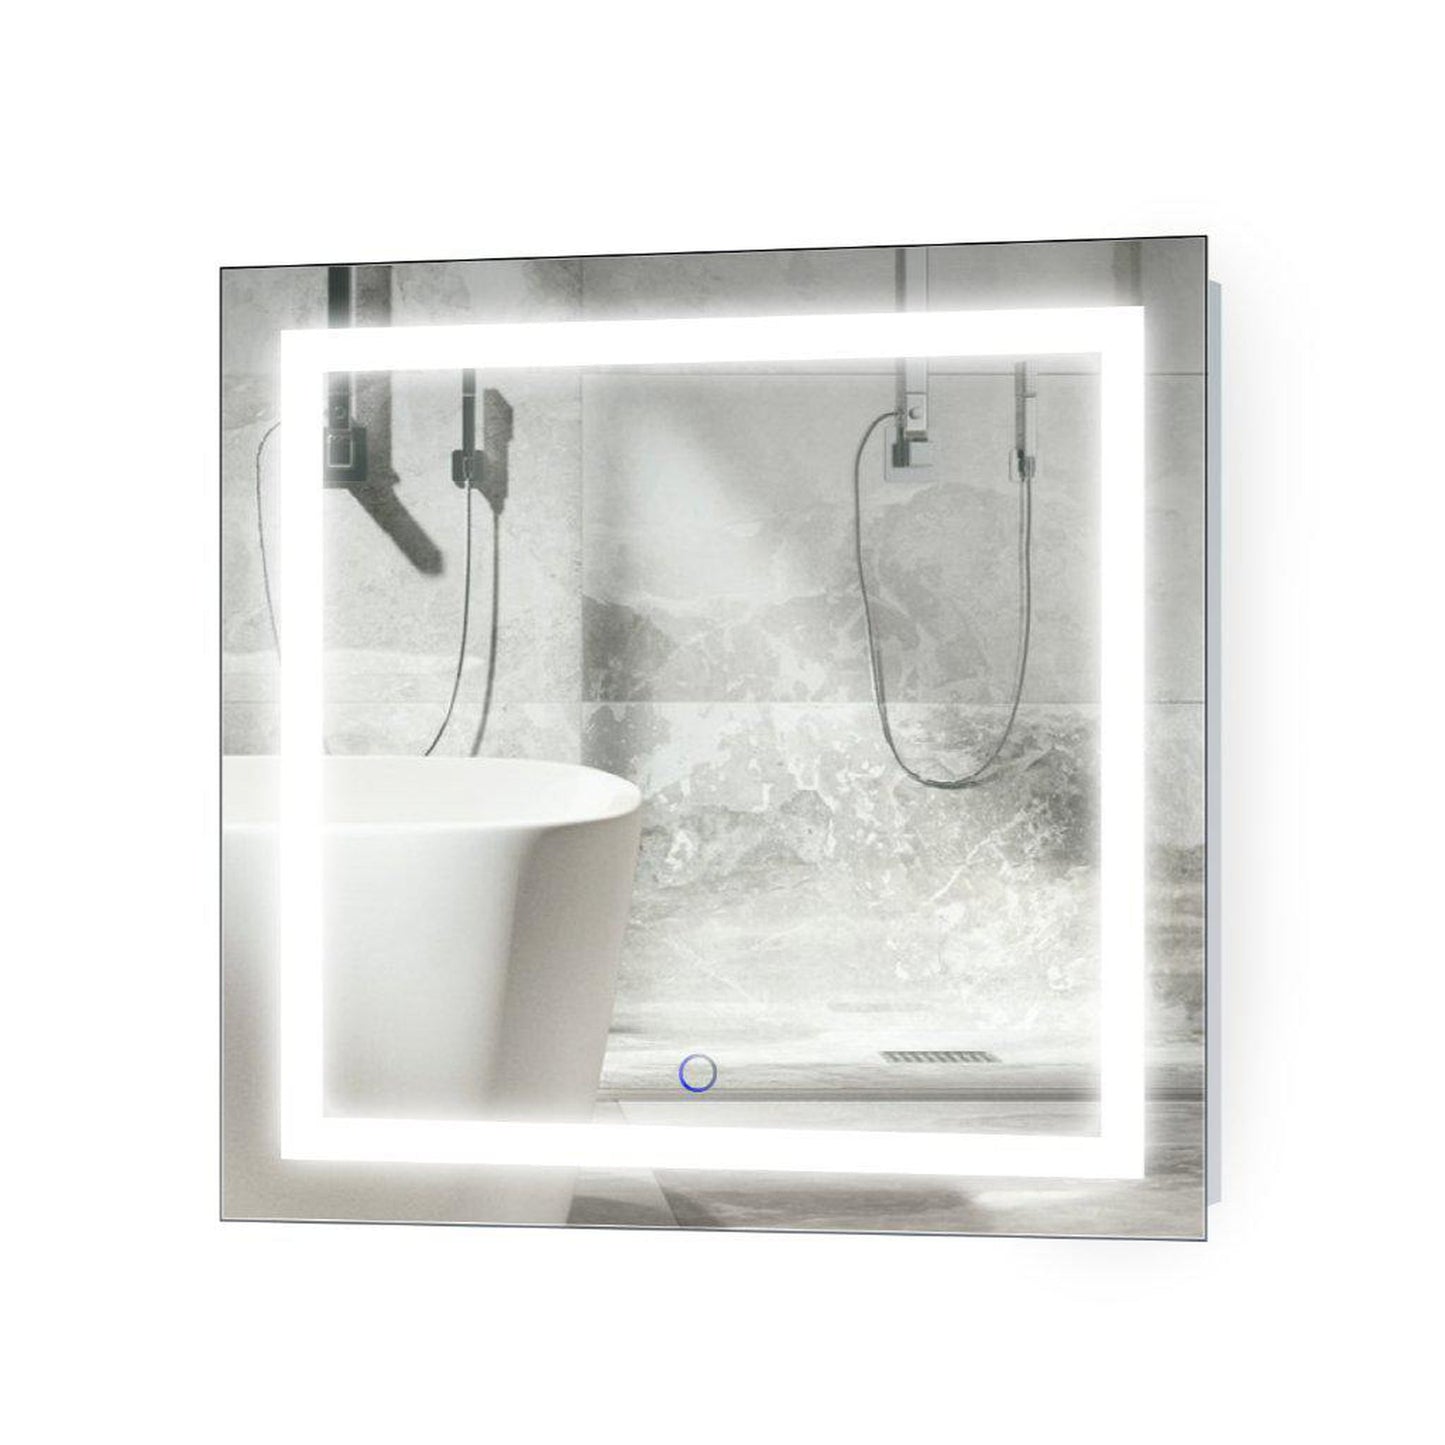 Krugg Reflections Icon 24" x 24" 5000K Square Wall-Mounted Illuminated Silver Backed LED Mirror With Built-in Defogger and Touch Sensor On/Off Built-in Dimmer